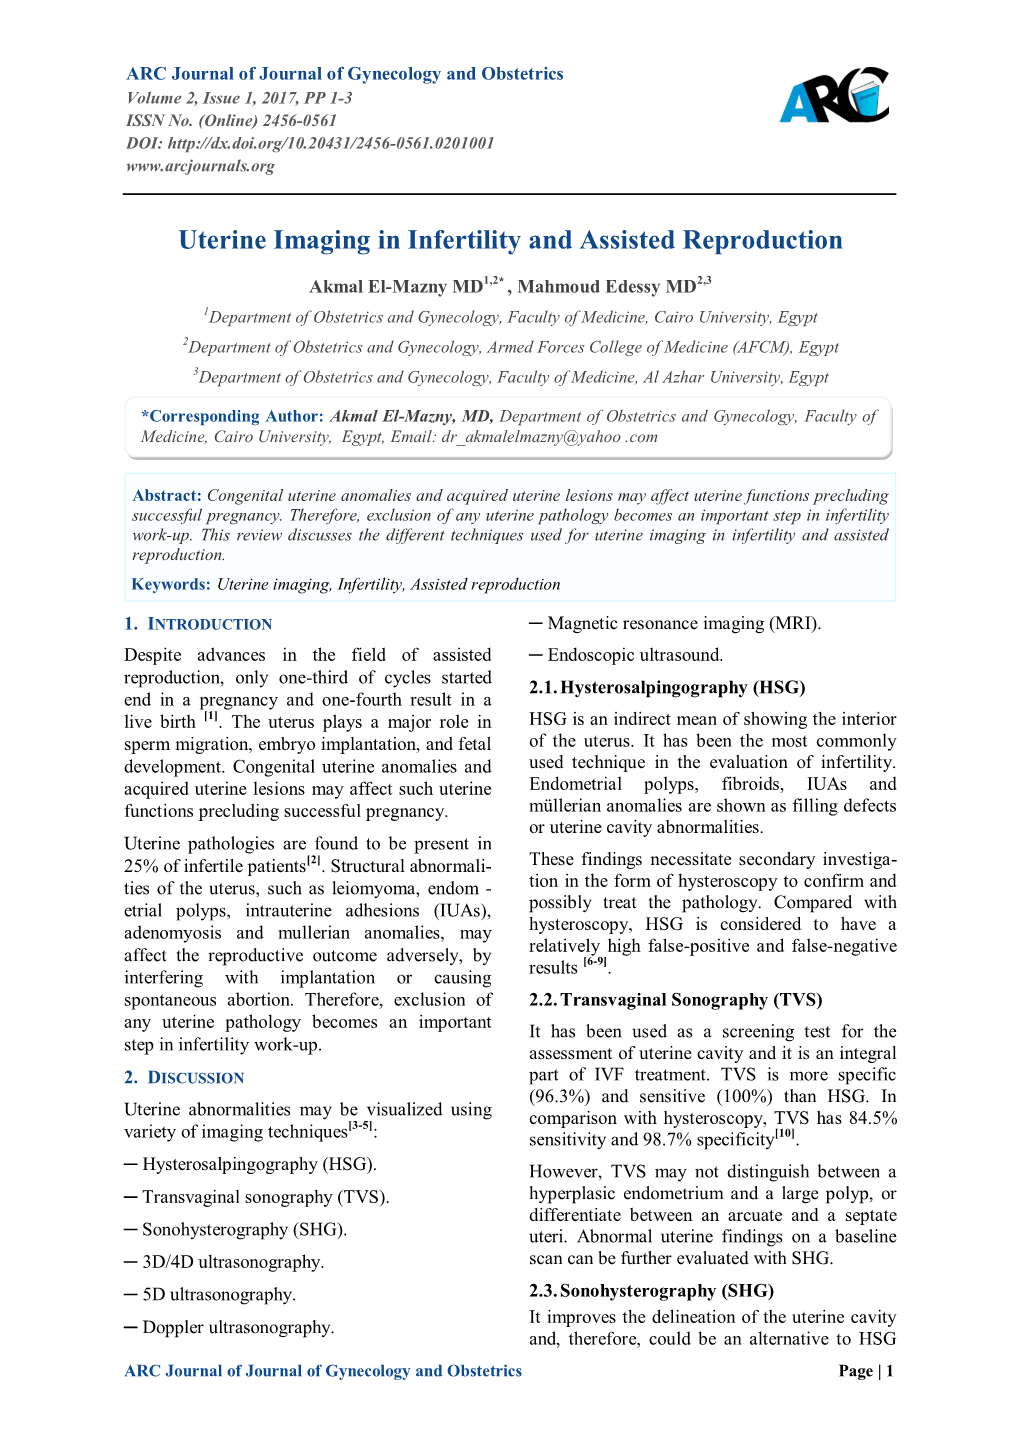 Uterine Imaging in Infertility and Assisted Reproduction